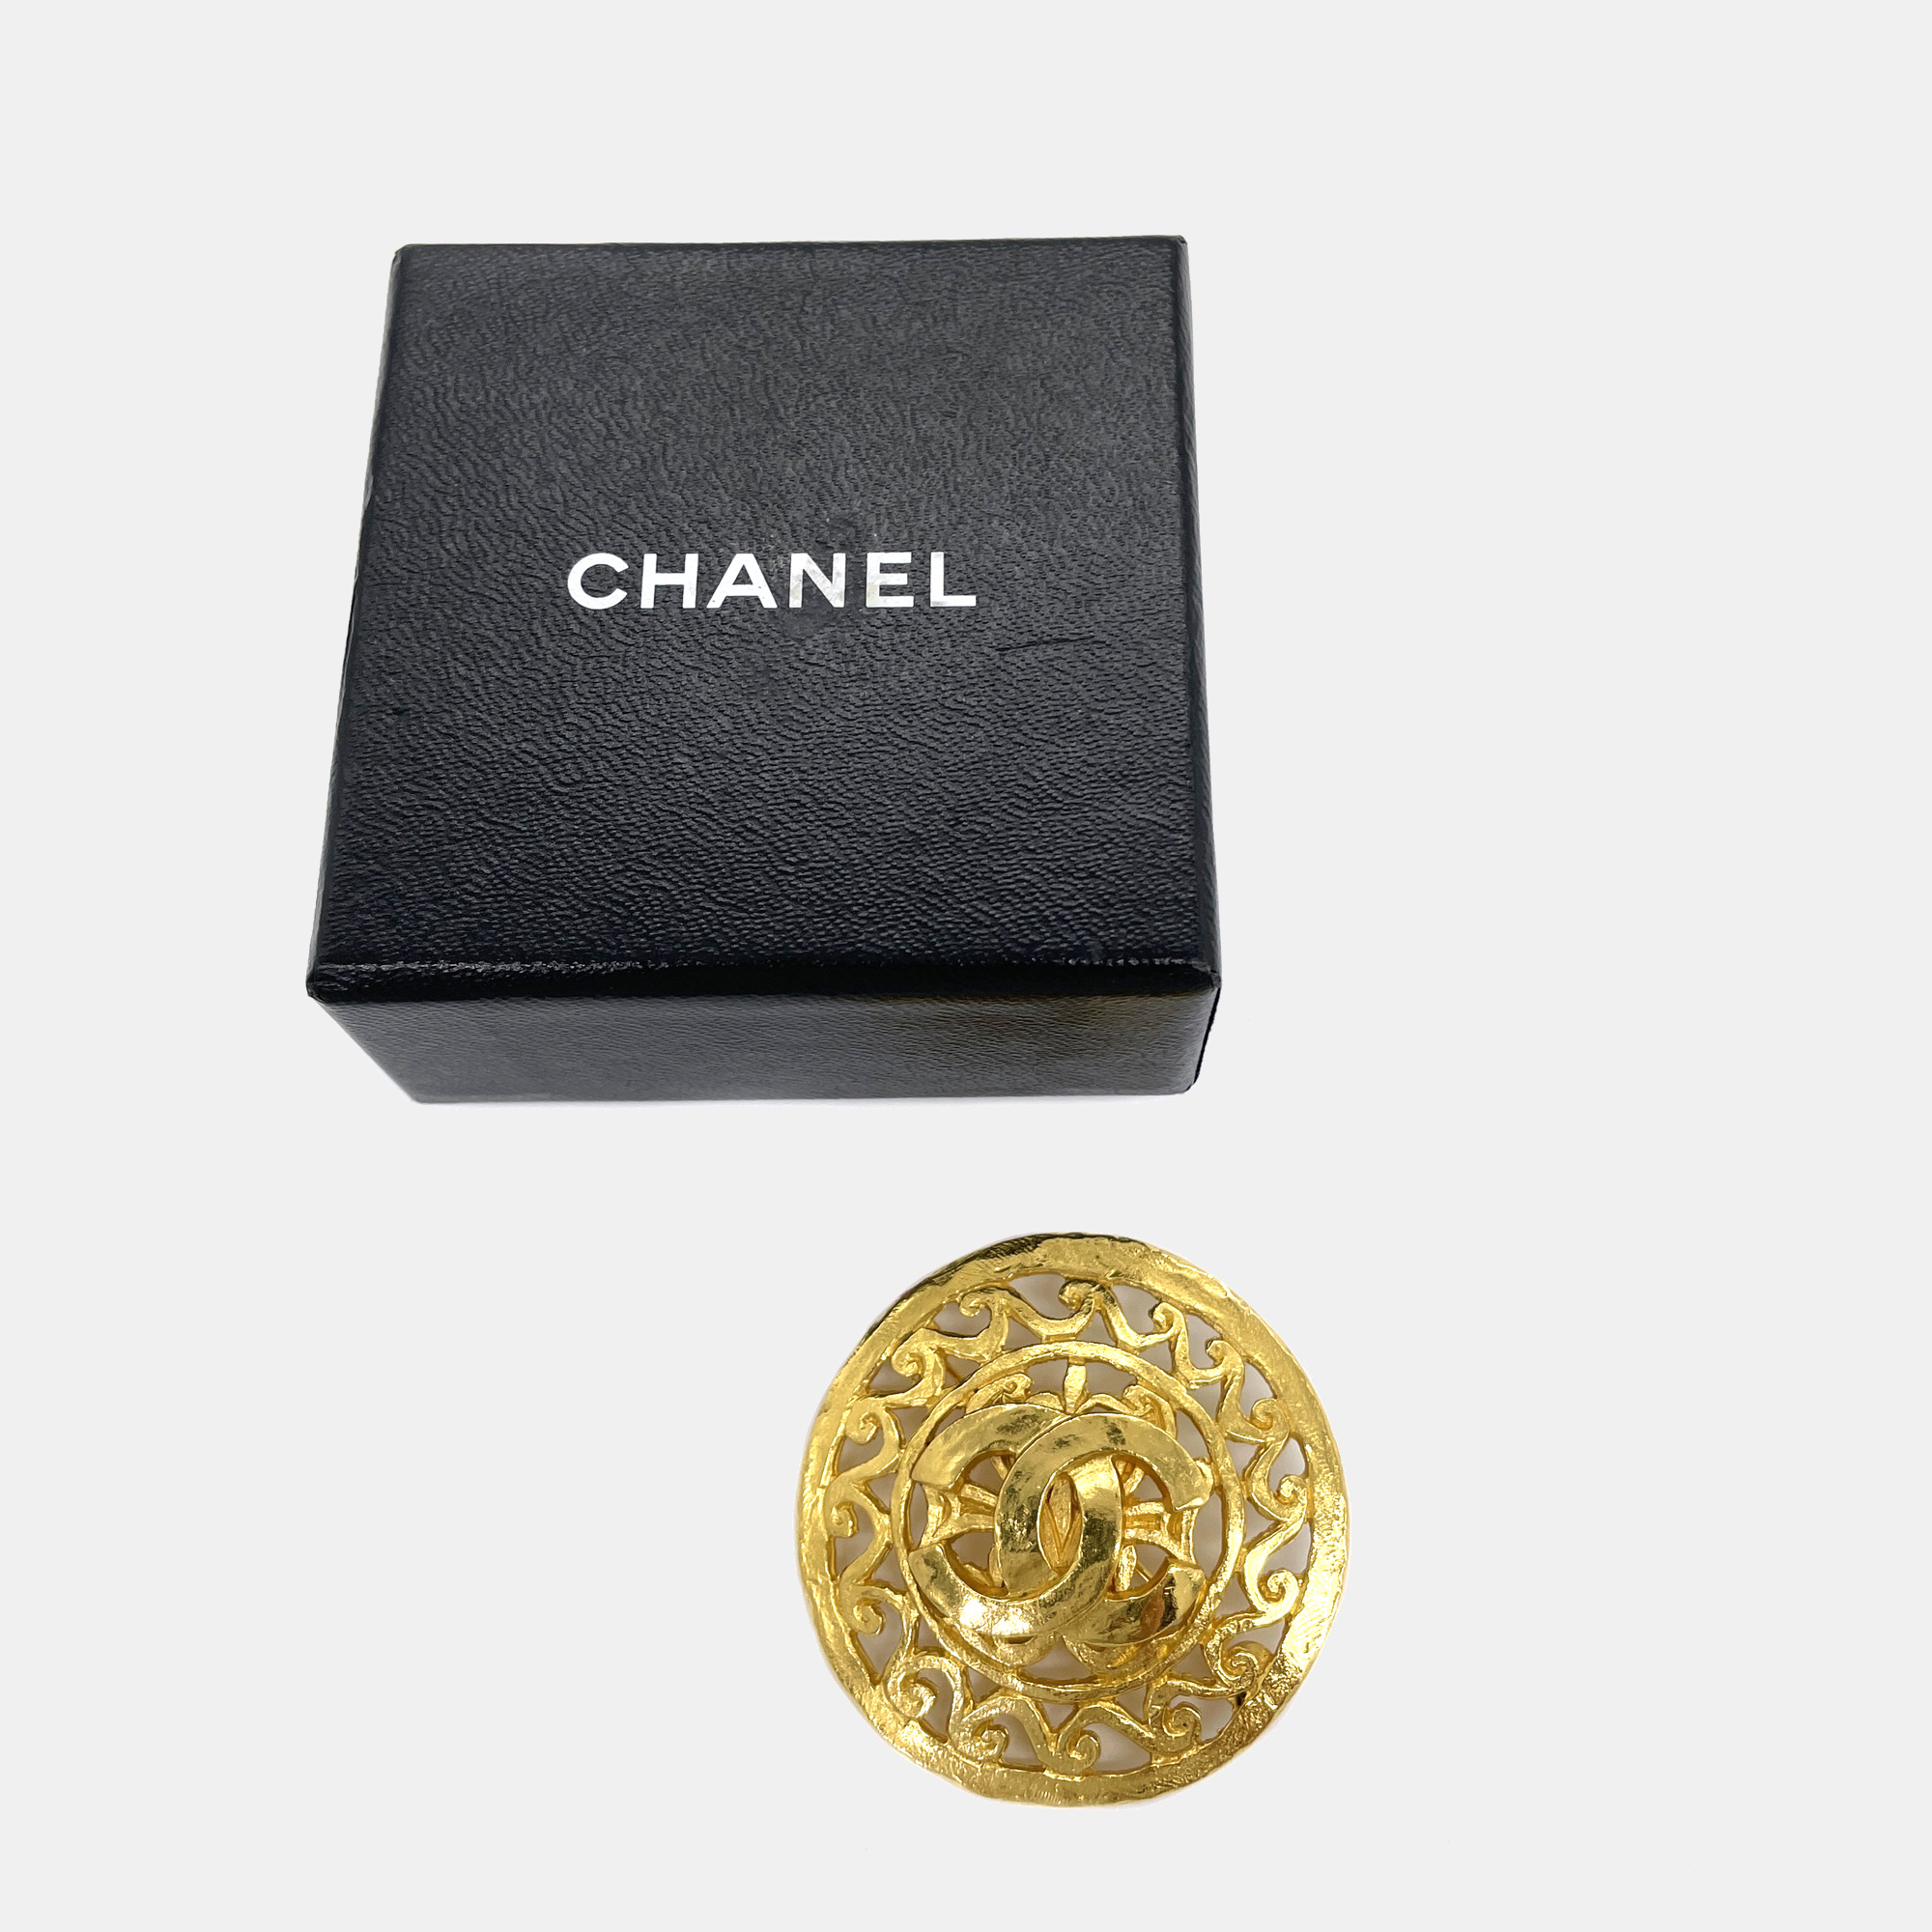 Chanel Yellow Gold Tone Metal CC Round Brooch